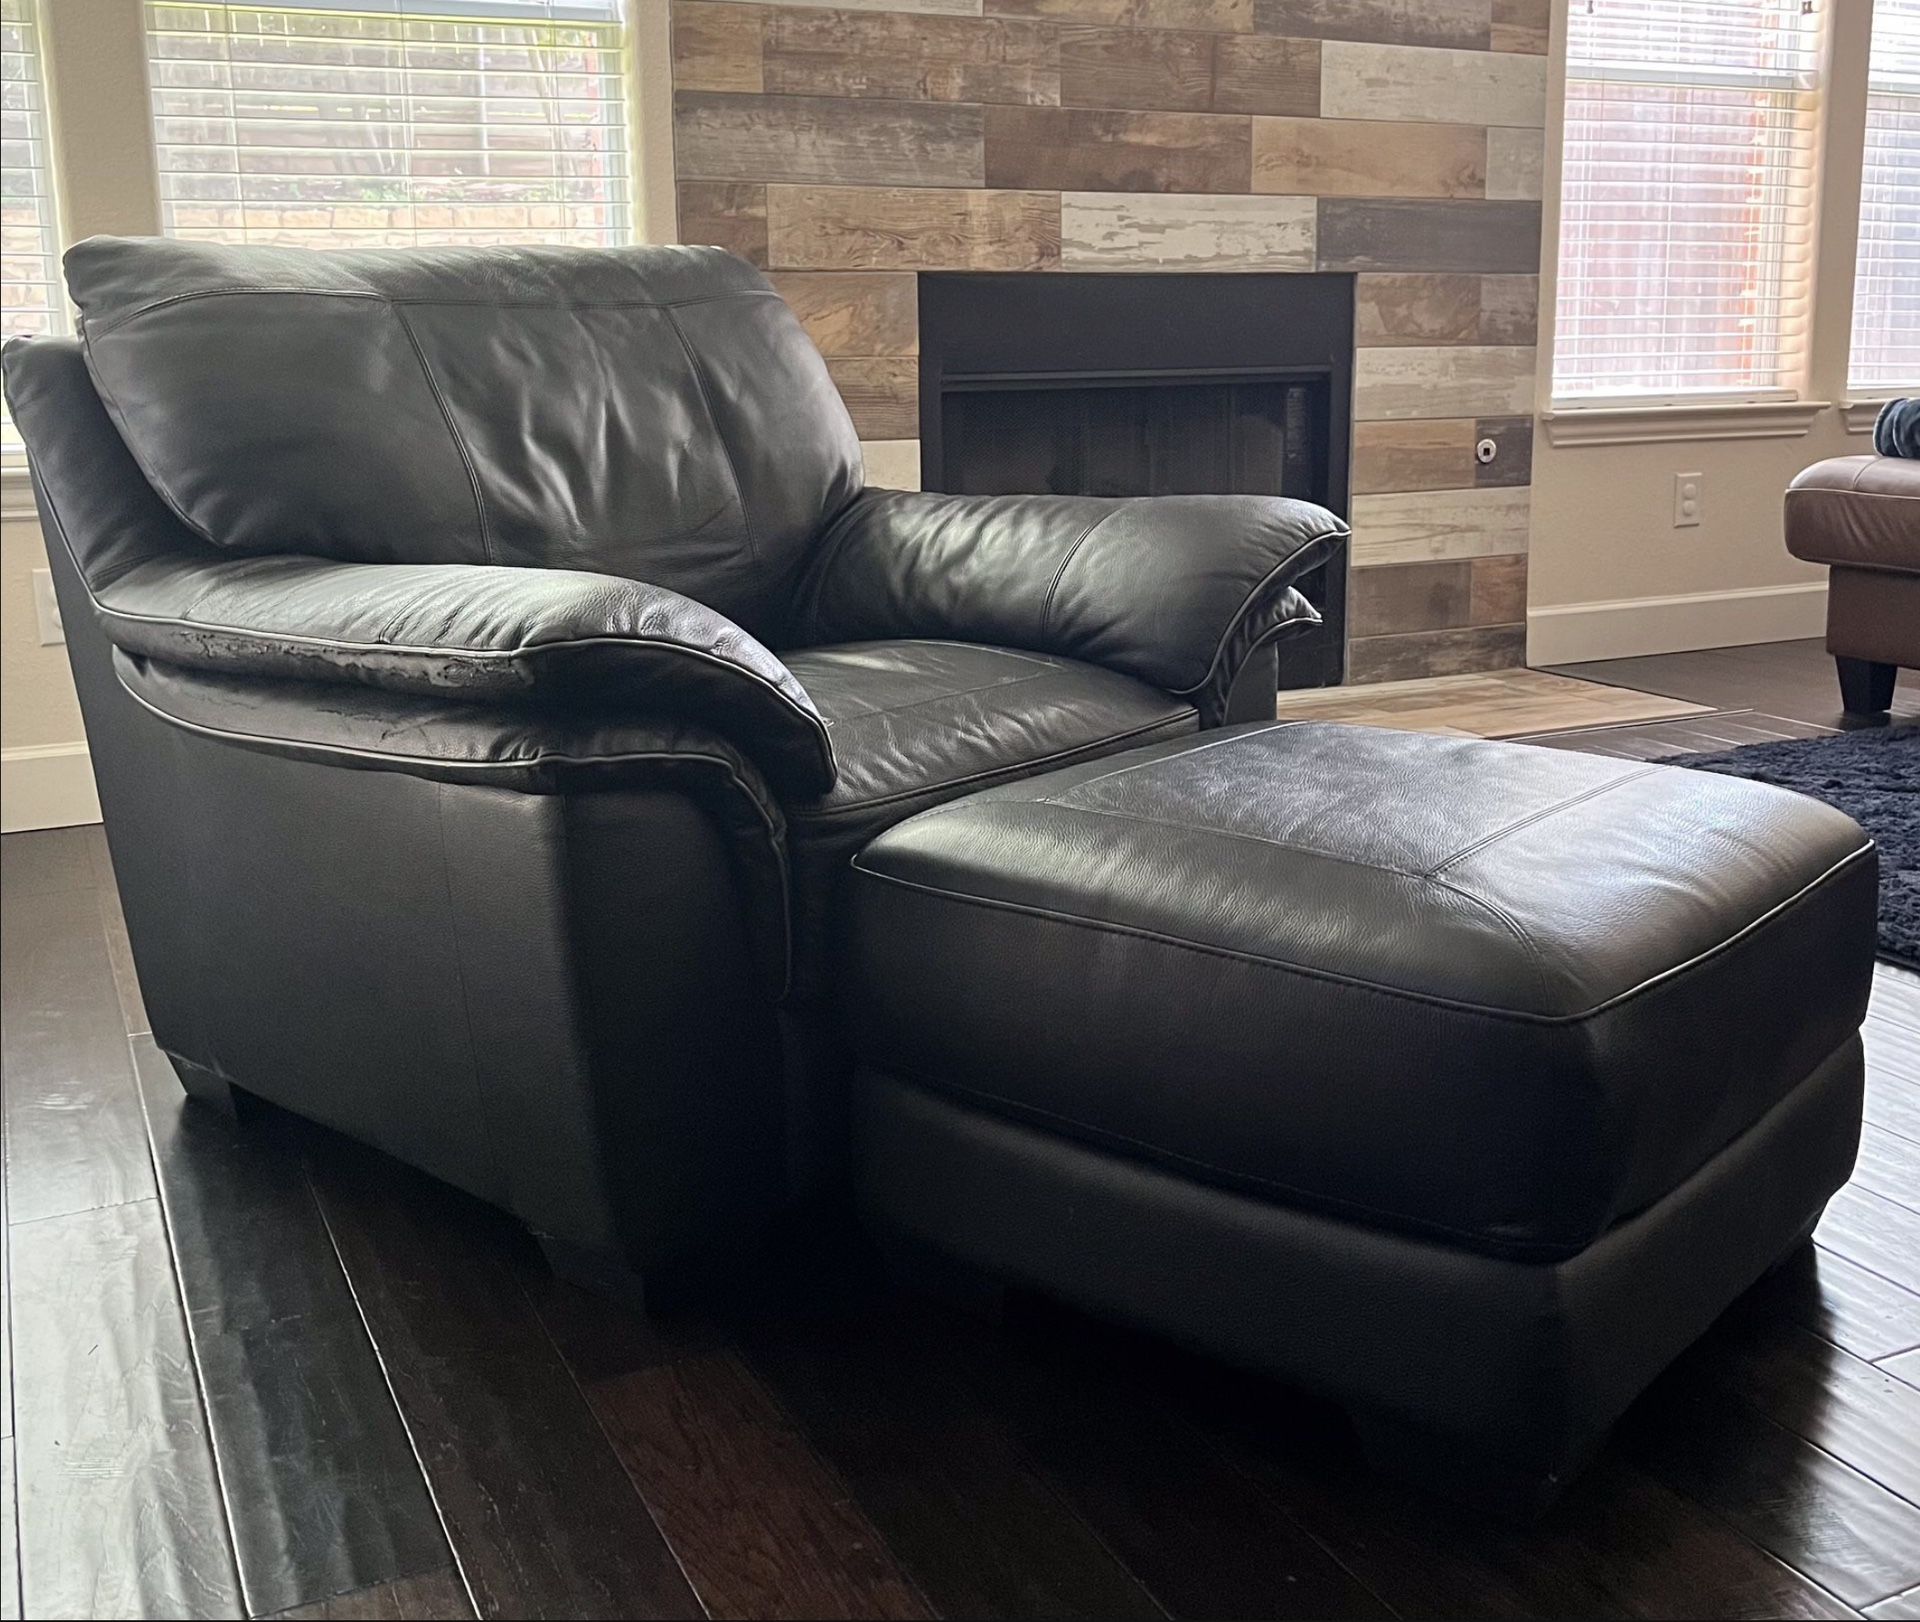 Black Leather Chair With Ottoman